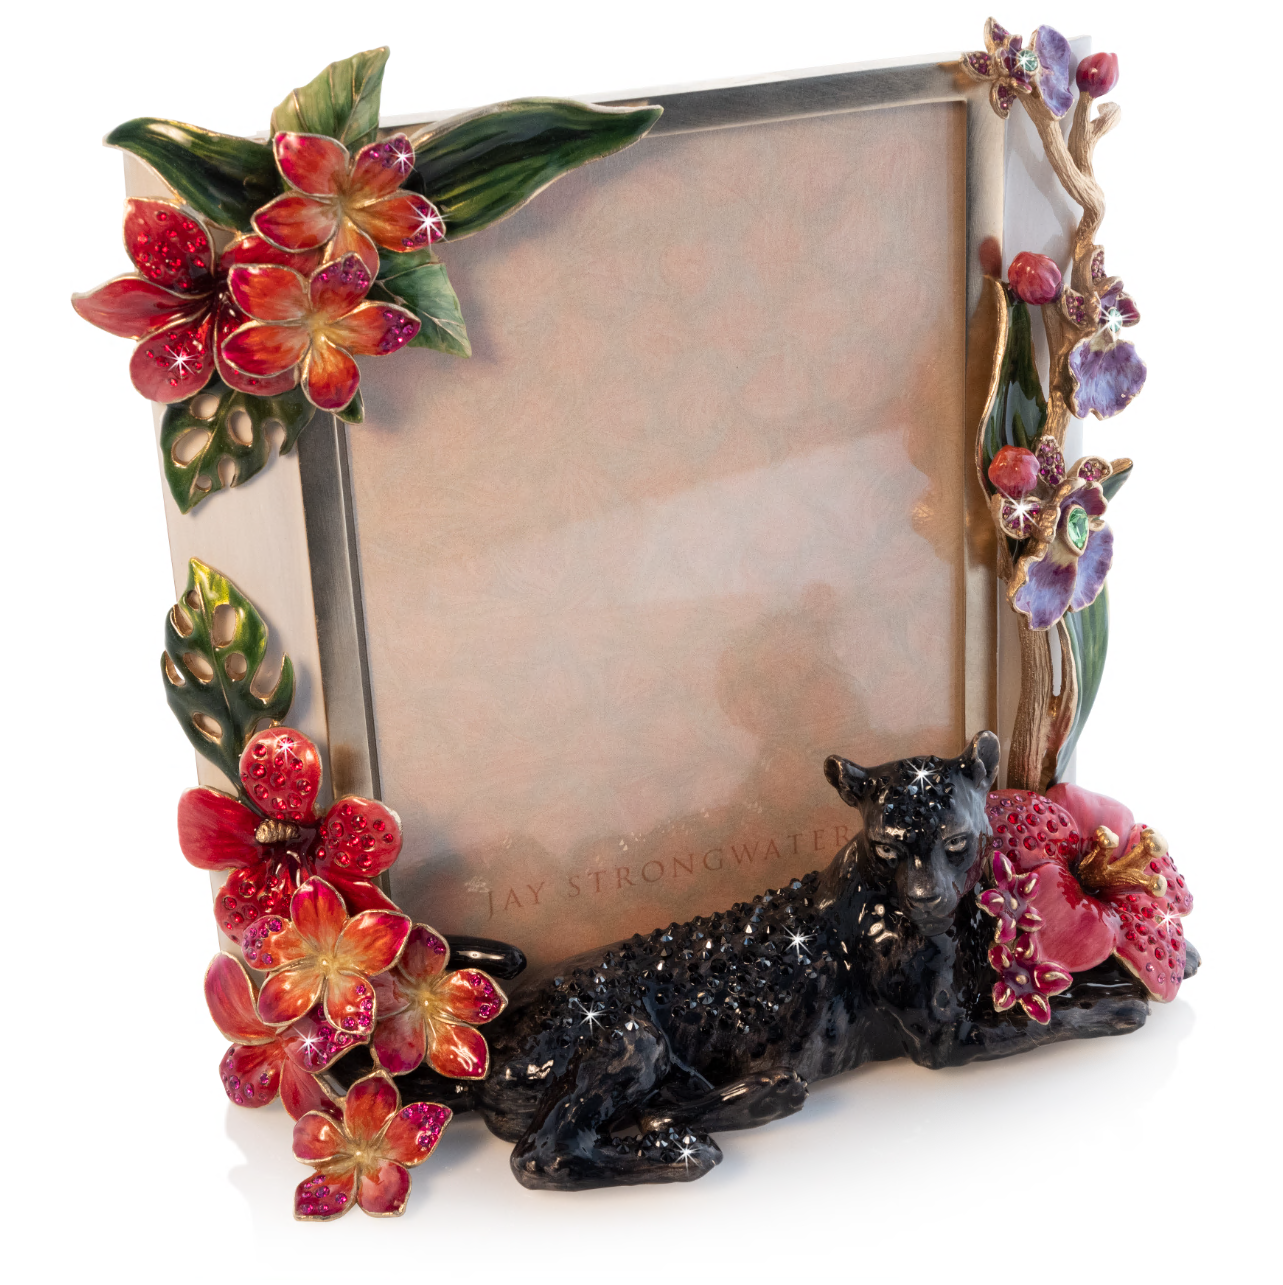 5" x 7" Floral Black Panther Picture Frame 